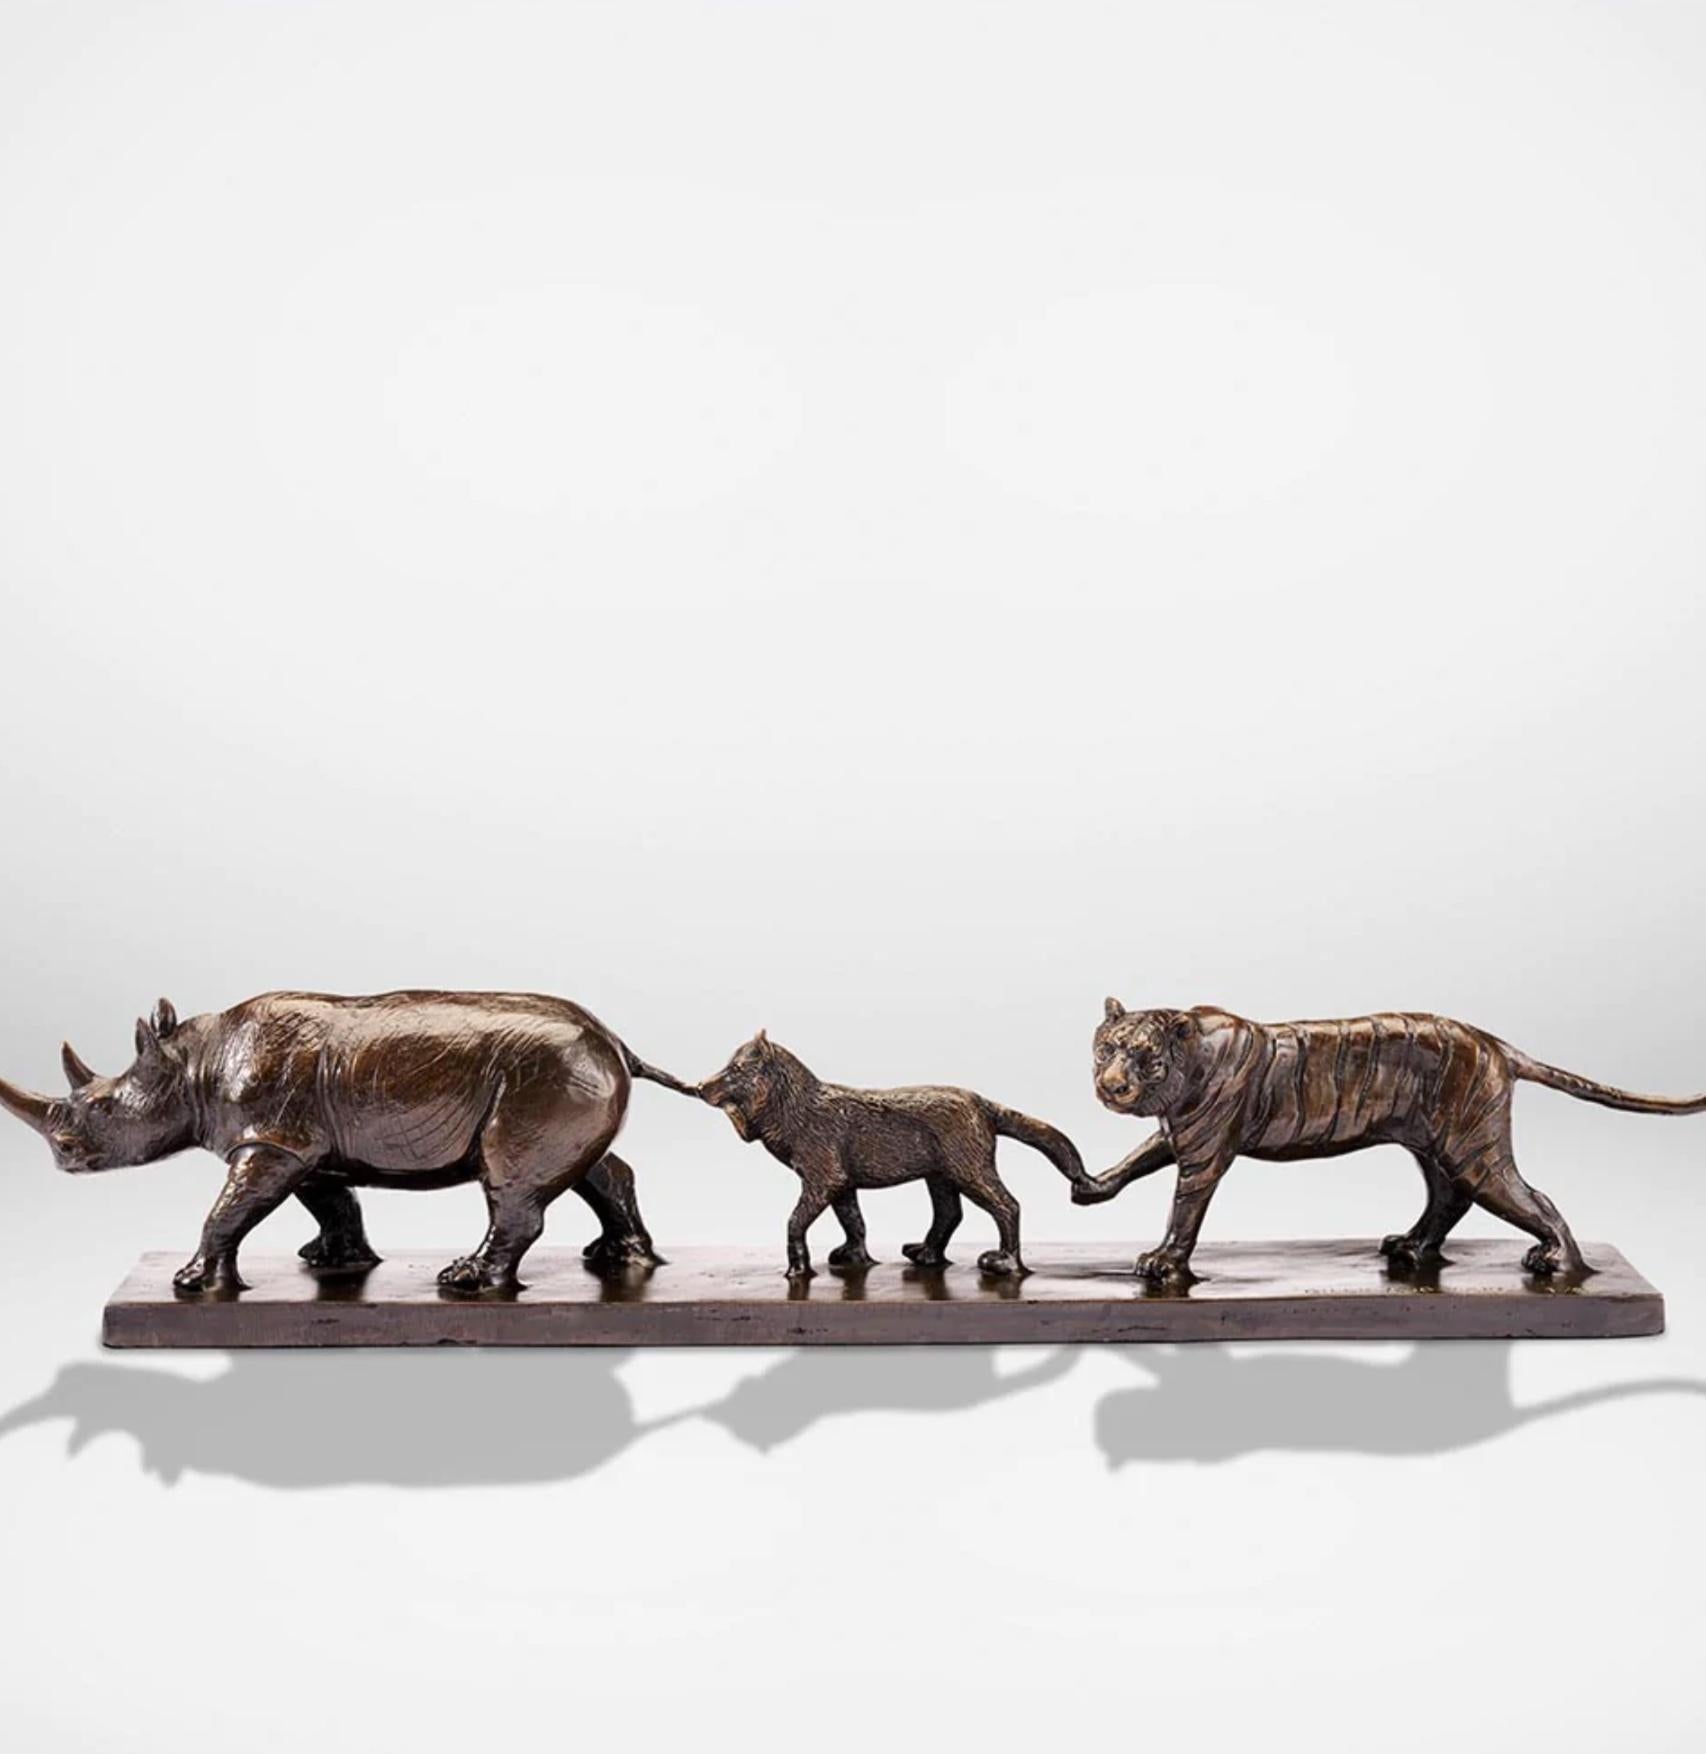 Authentic Bronze Love The Rhino, Fox and Tiger Sculpture by Gillie and Marc - Art by Gillie and Marc Schattner